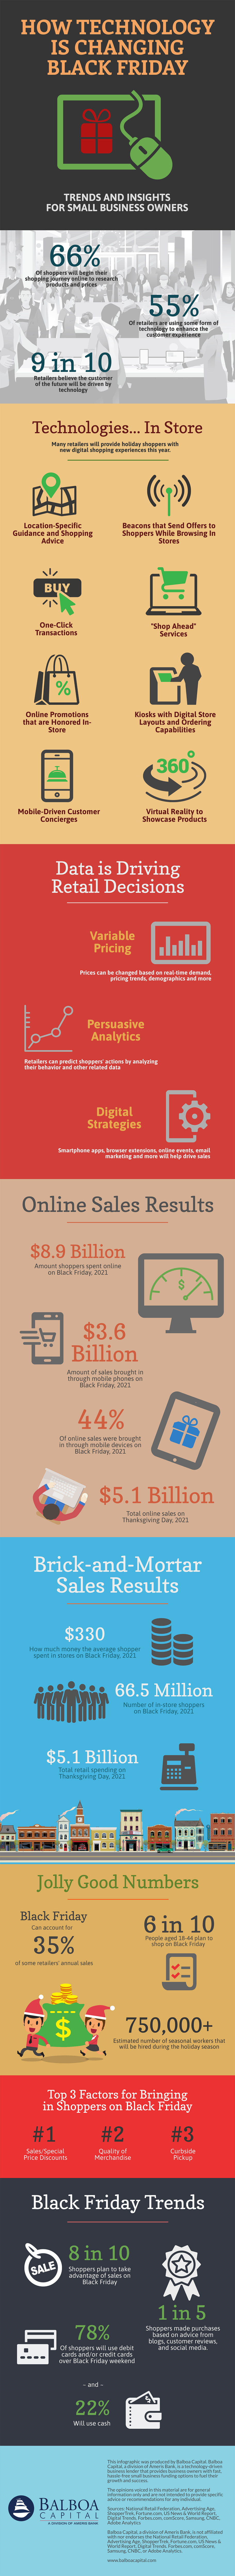 Black Friday Sales Infographic